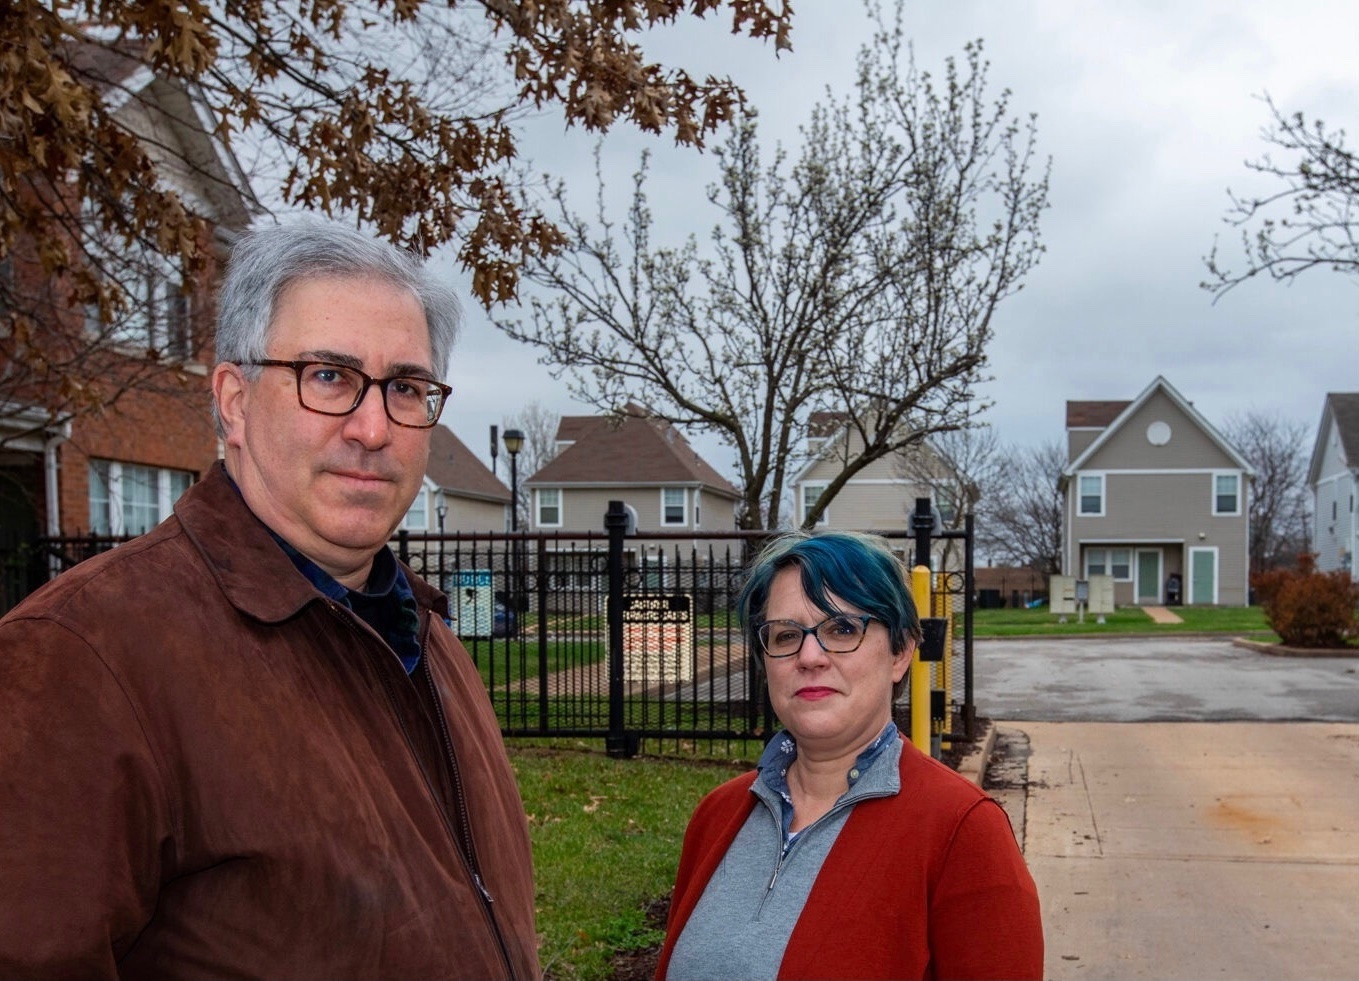 Two people standing in front of a residential area, with a black iron fence behind them, on a gray-sky day.